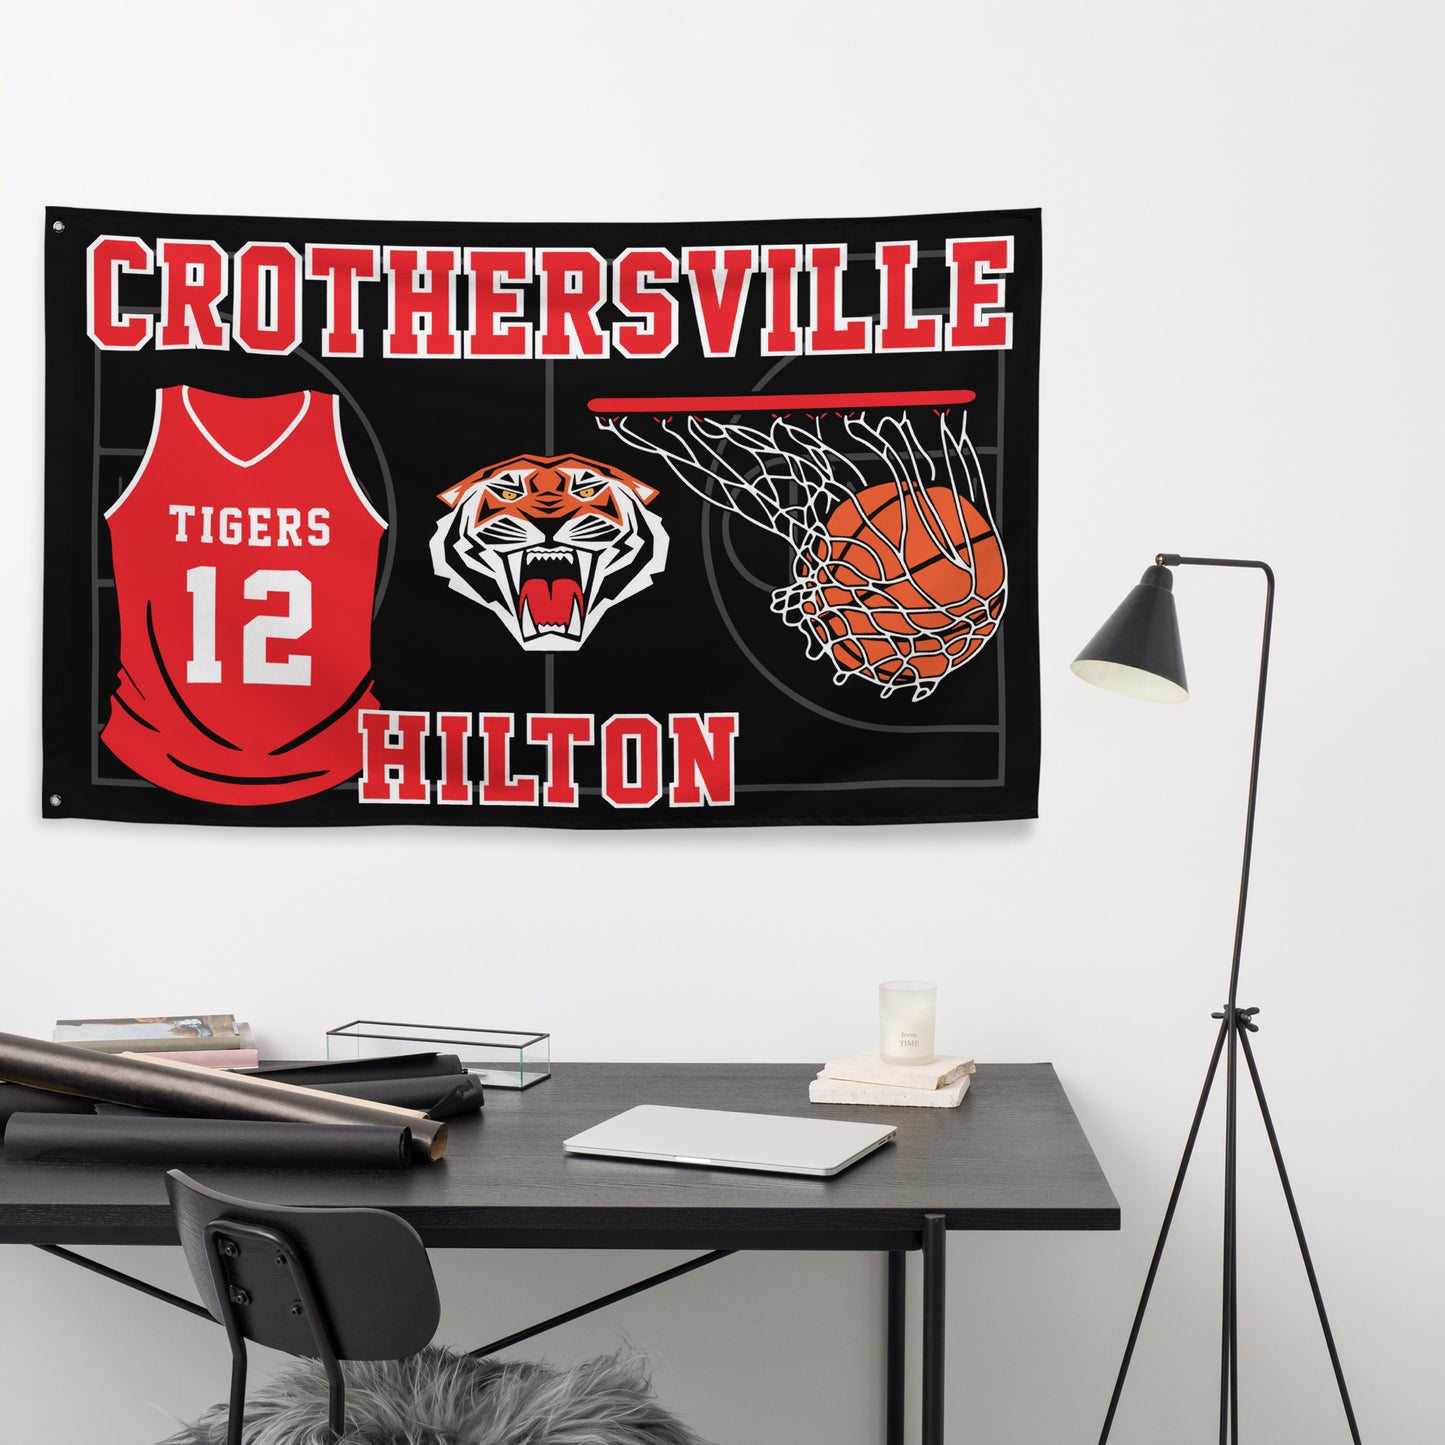 PERSONALIZED - Crothersville Tigers Basketball 5' x 3' Wall Flag